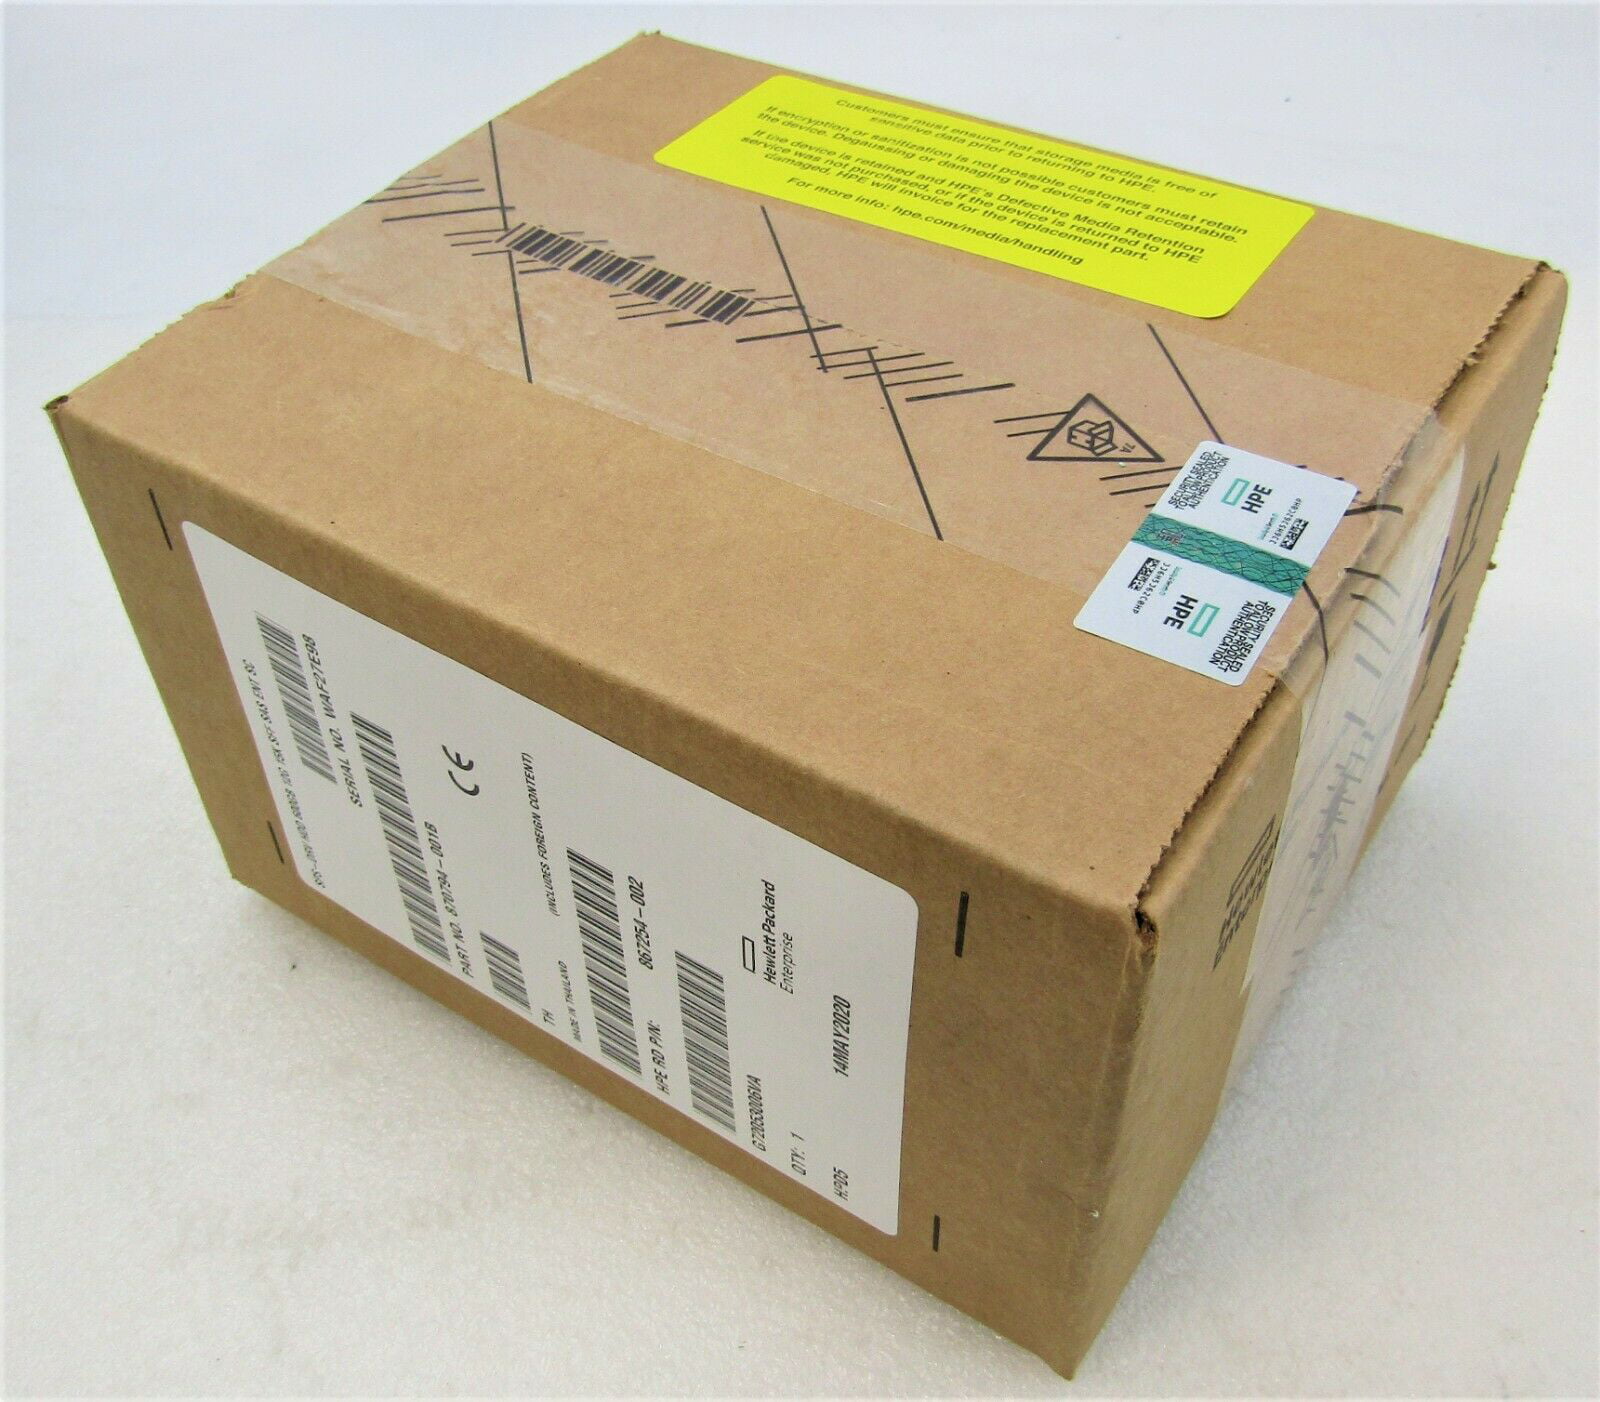 870757-B21 870794-001 HPE 600GB 12G SAS 15K SFF 2.5" SC ENT DS HDD Retail NEW 